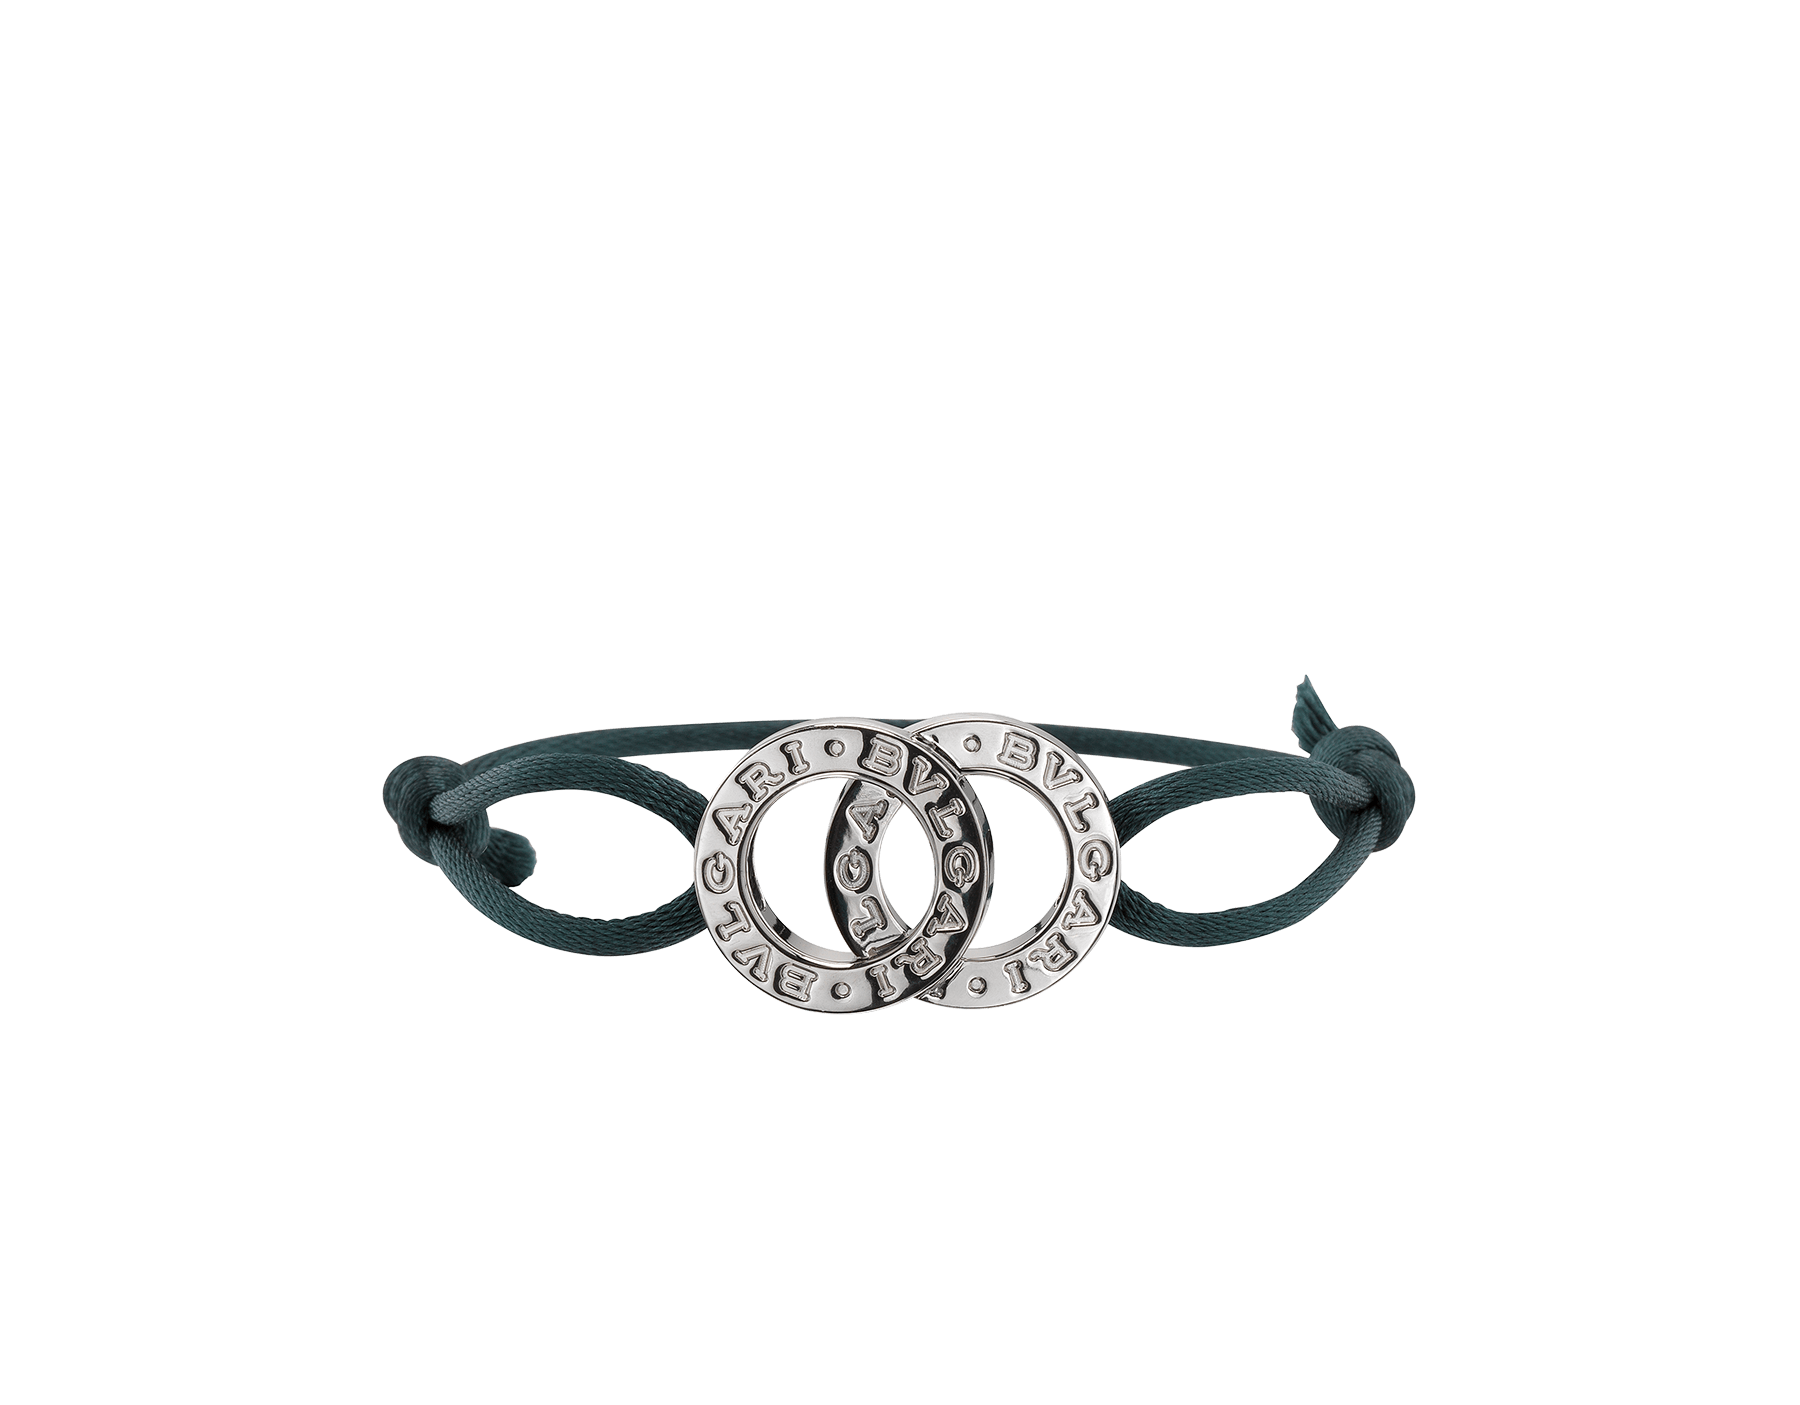 BVLGARI BVLGARI bracelet in crystal rose fabric with an iconic double logo décor in sterling silver BRACLT-FORTUNAUa image 1